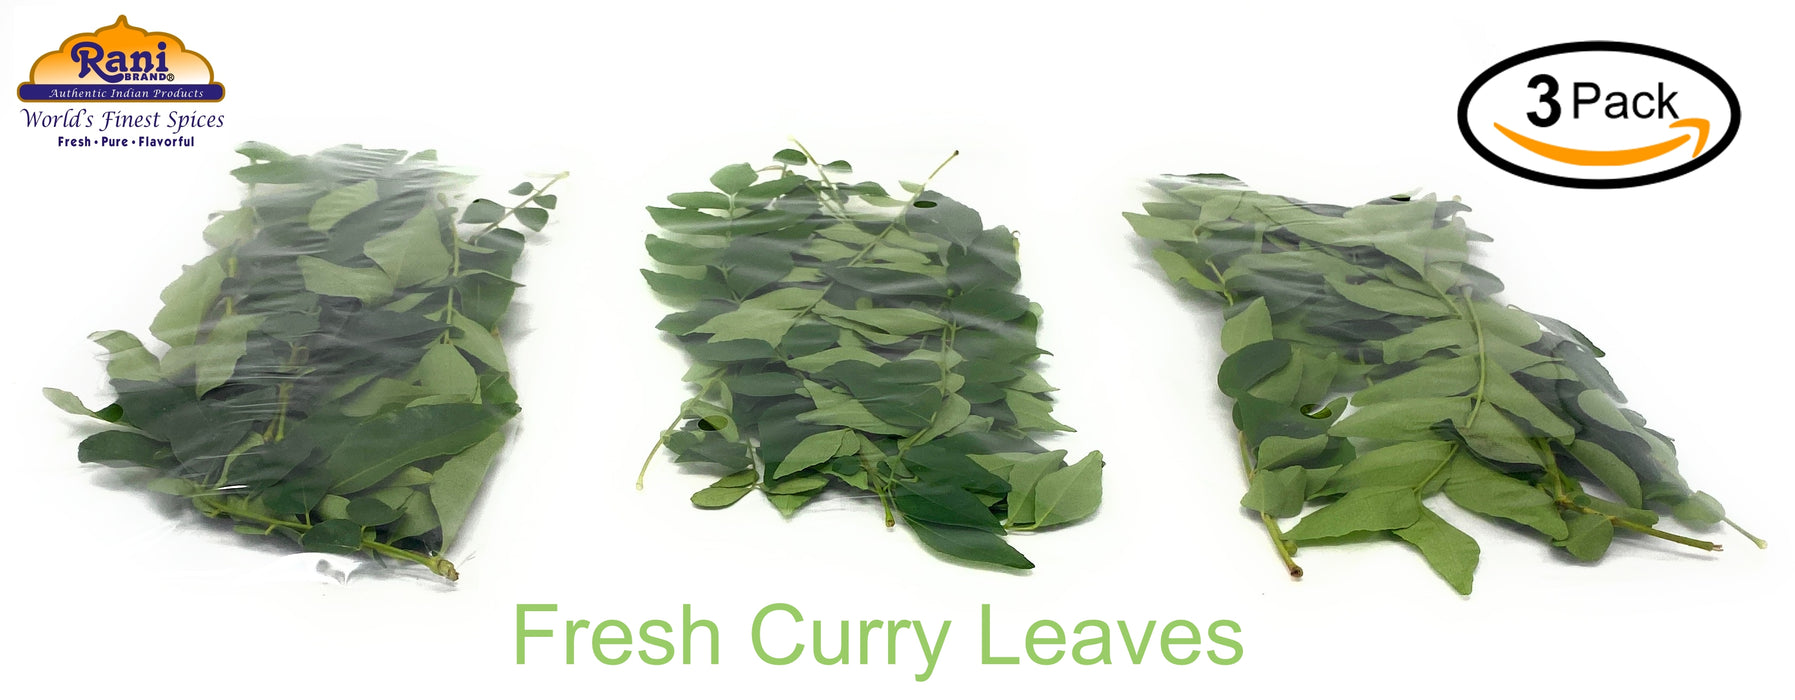 Rani Fresh Curry Leaves 1 Ounce (Pack of 3)